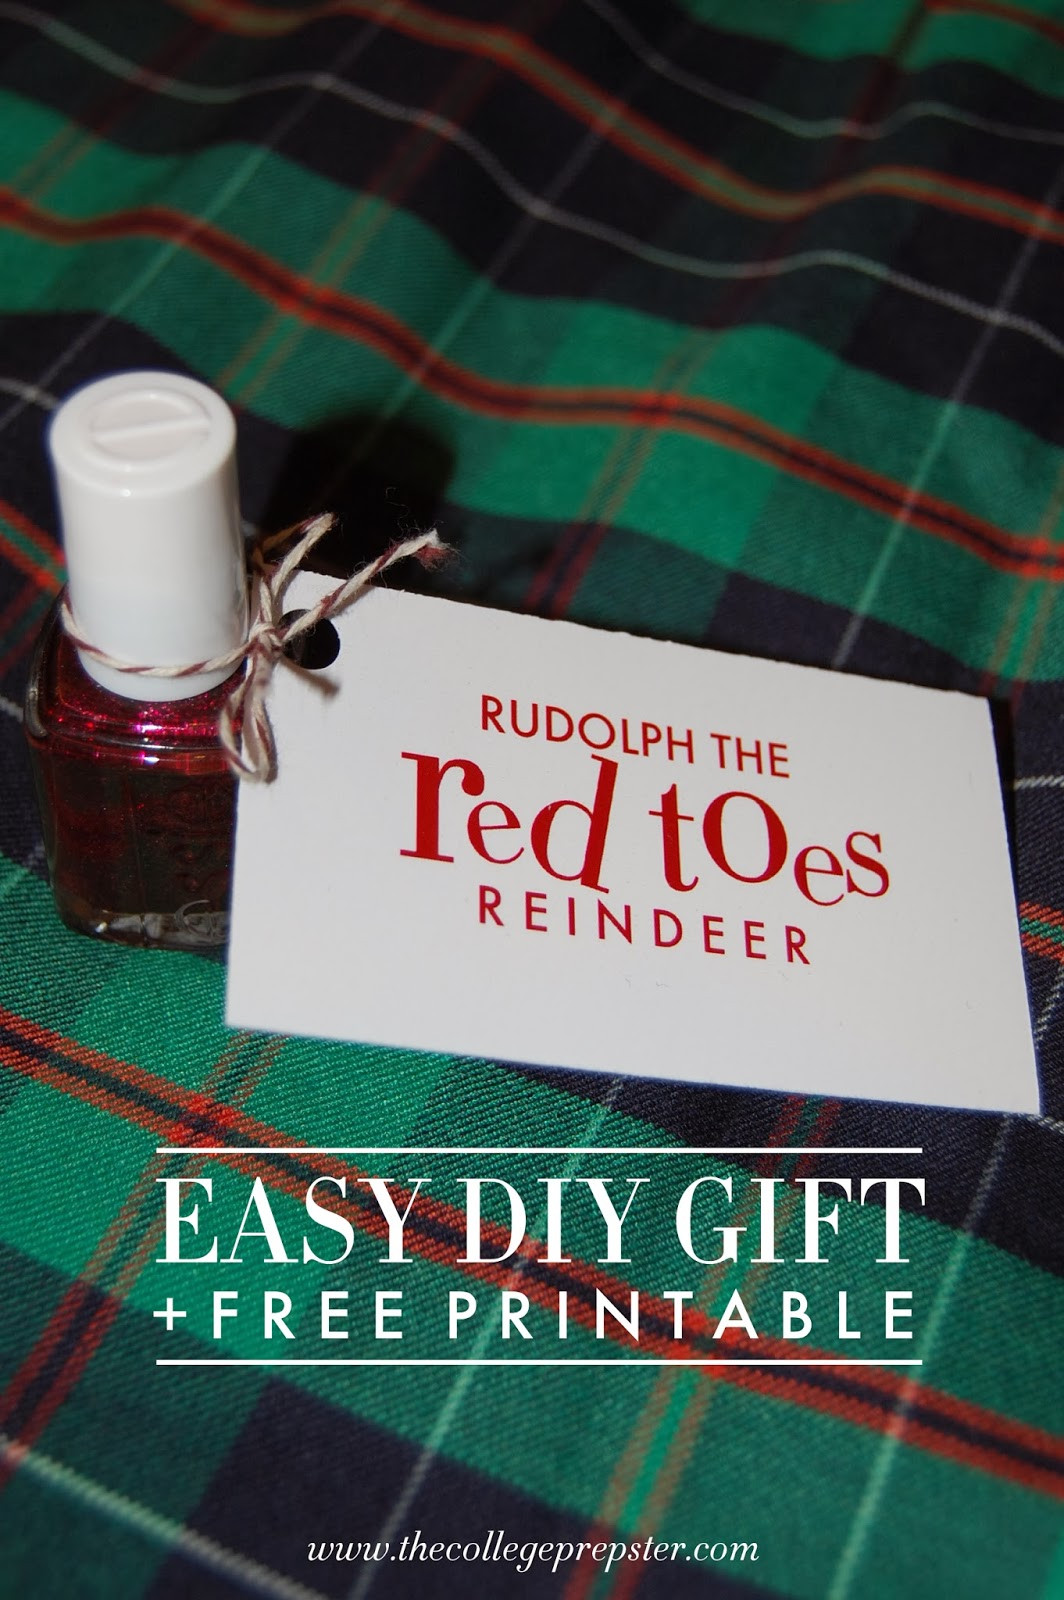 Free Gift Ideas For Girlfriend
 Easy Gift for Girlfriends Under $10 Carly the Prepster